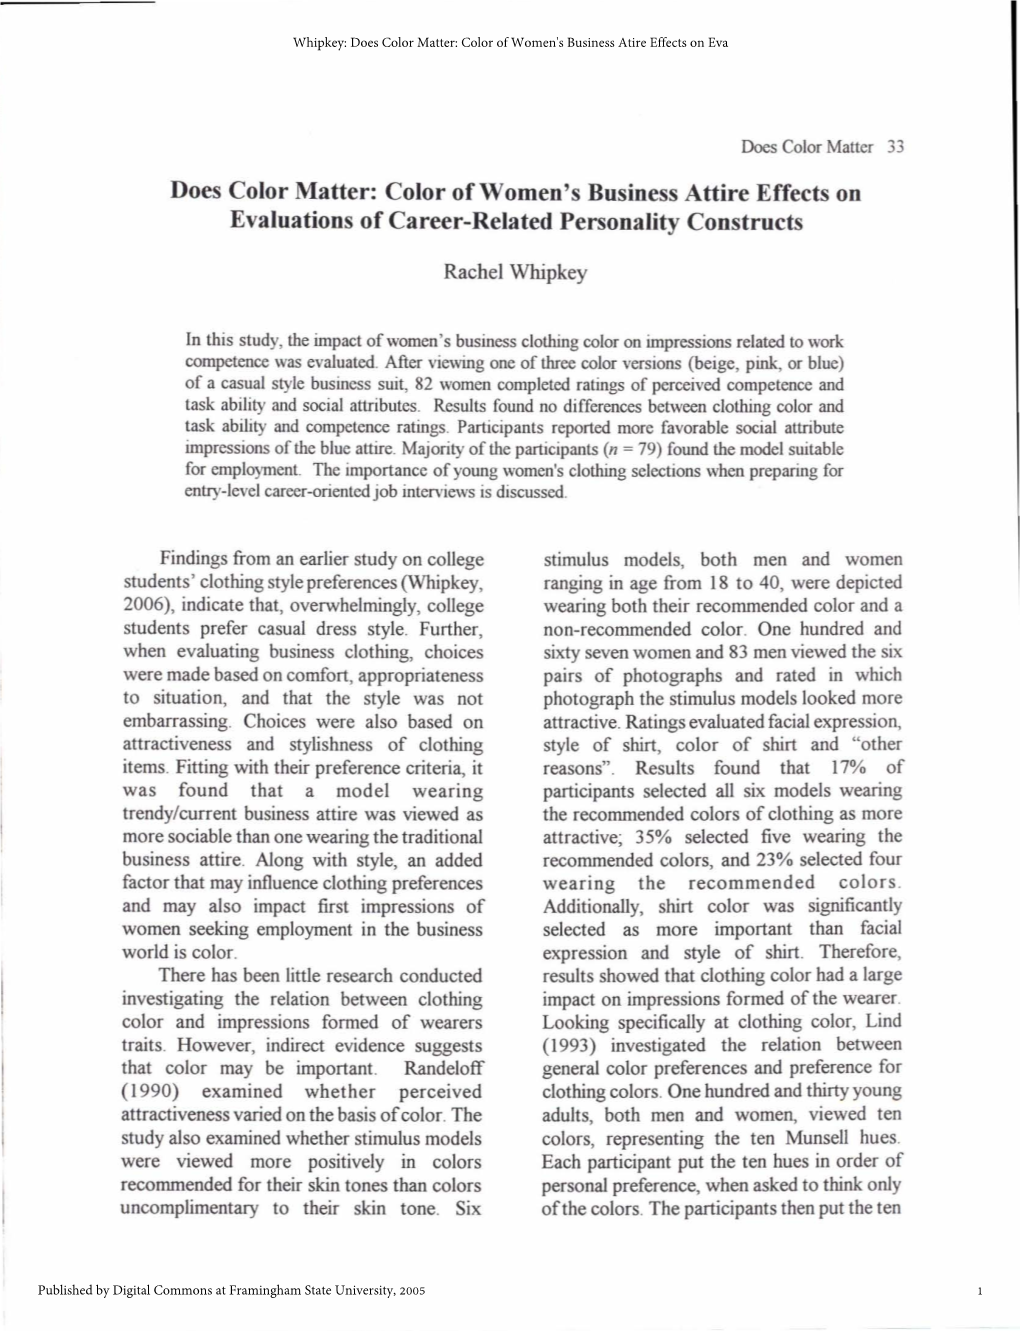 Color of Women's Business Attire Effects on Evaluations of Career-Related Personality Constructs